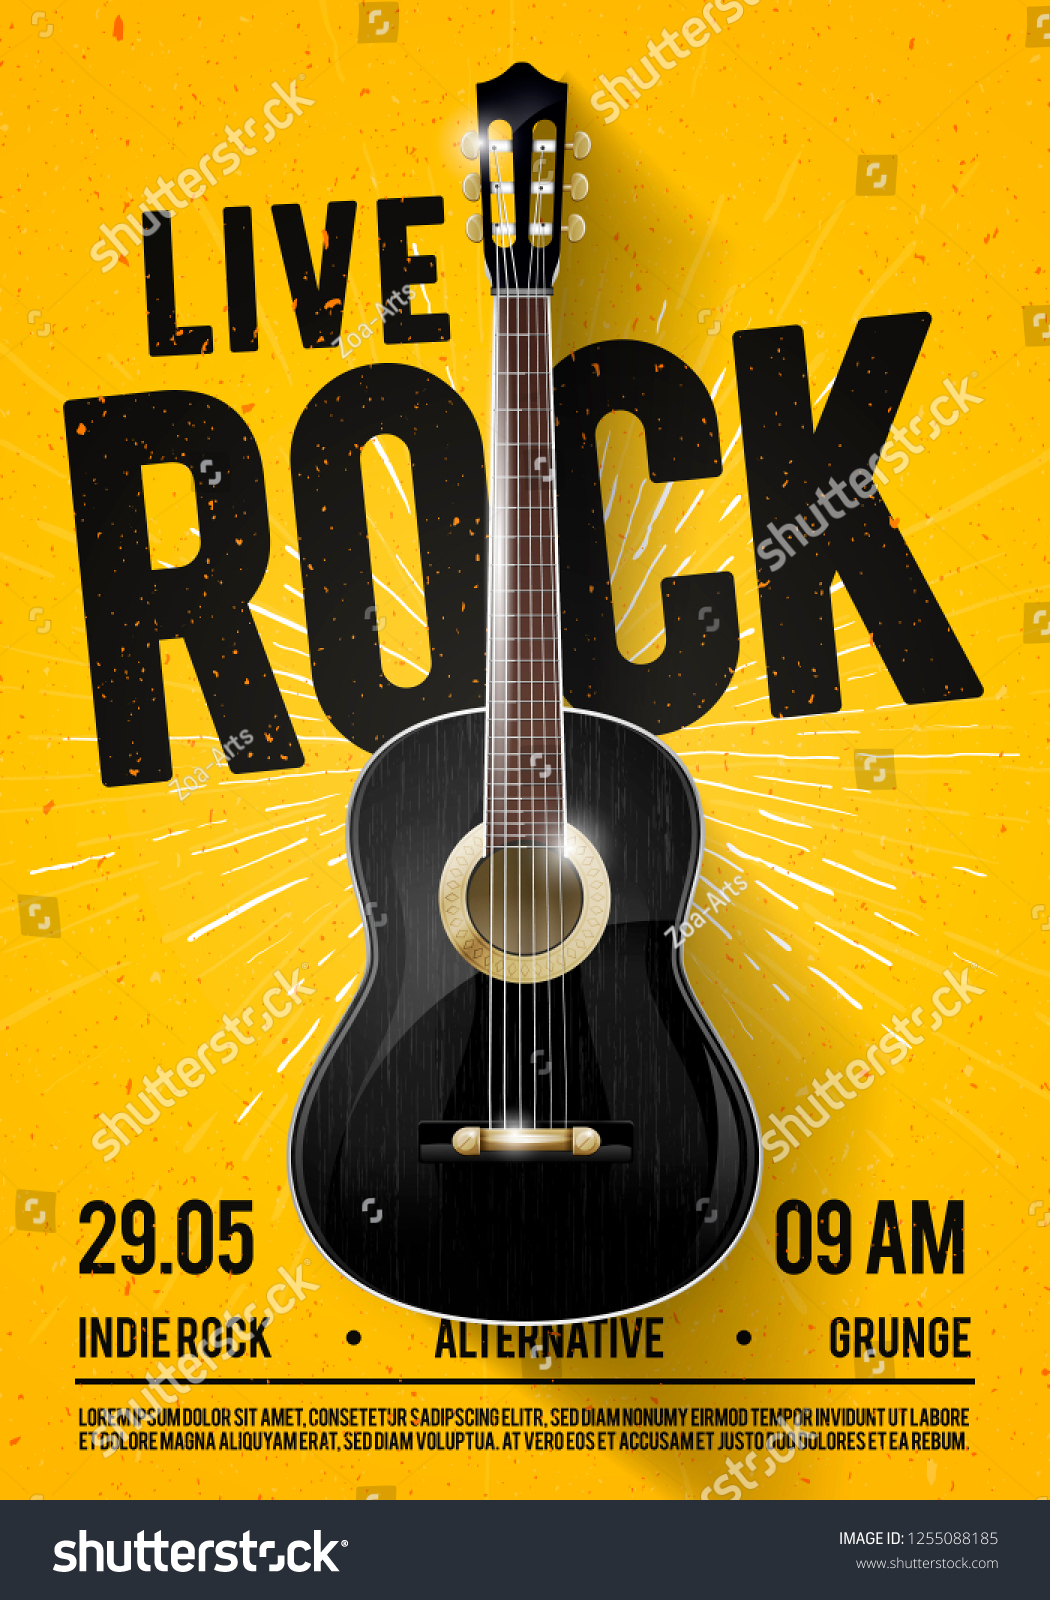 Vector Illustration Beautiful Live Classic Rock Stock Vector Royalty Free 1255088185